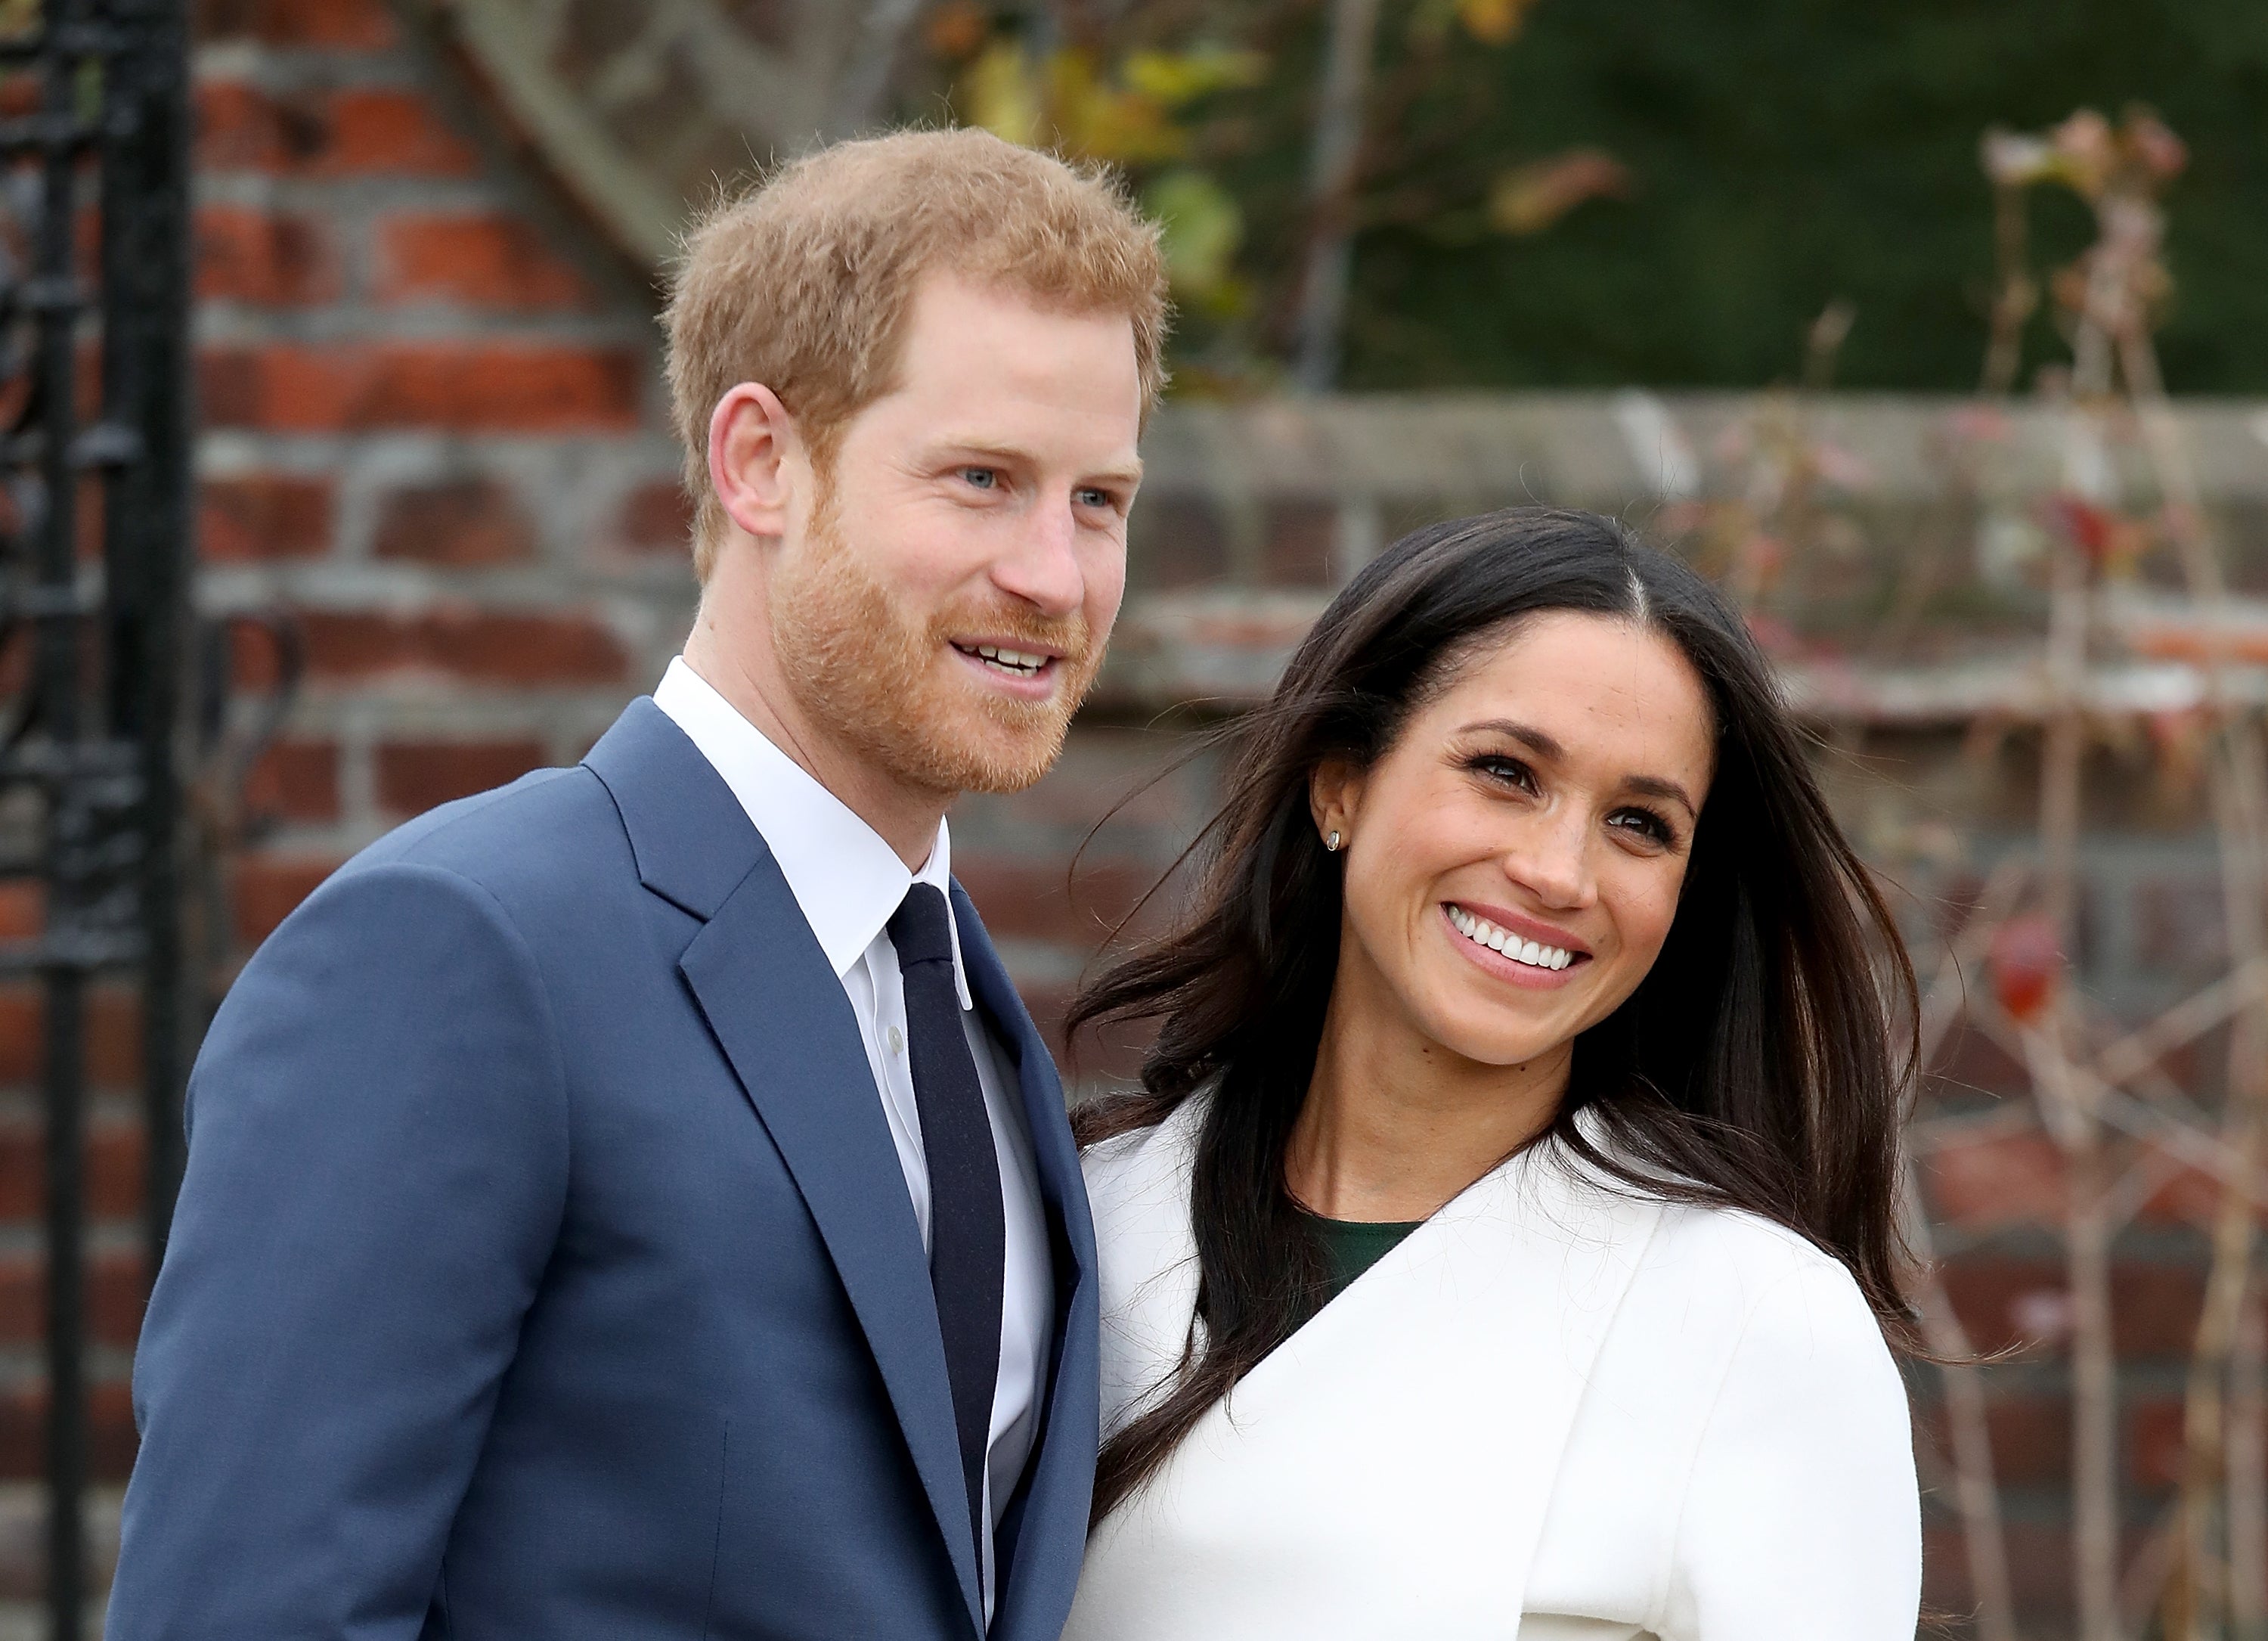 Opinion: Prince Harry And Meghan Markle Deserve A Fairy-Tale Ending Where They Are Celebrated, Not Tolerated